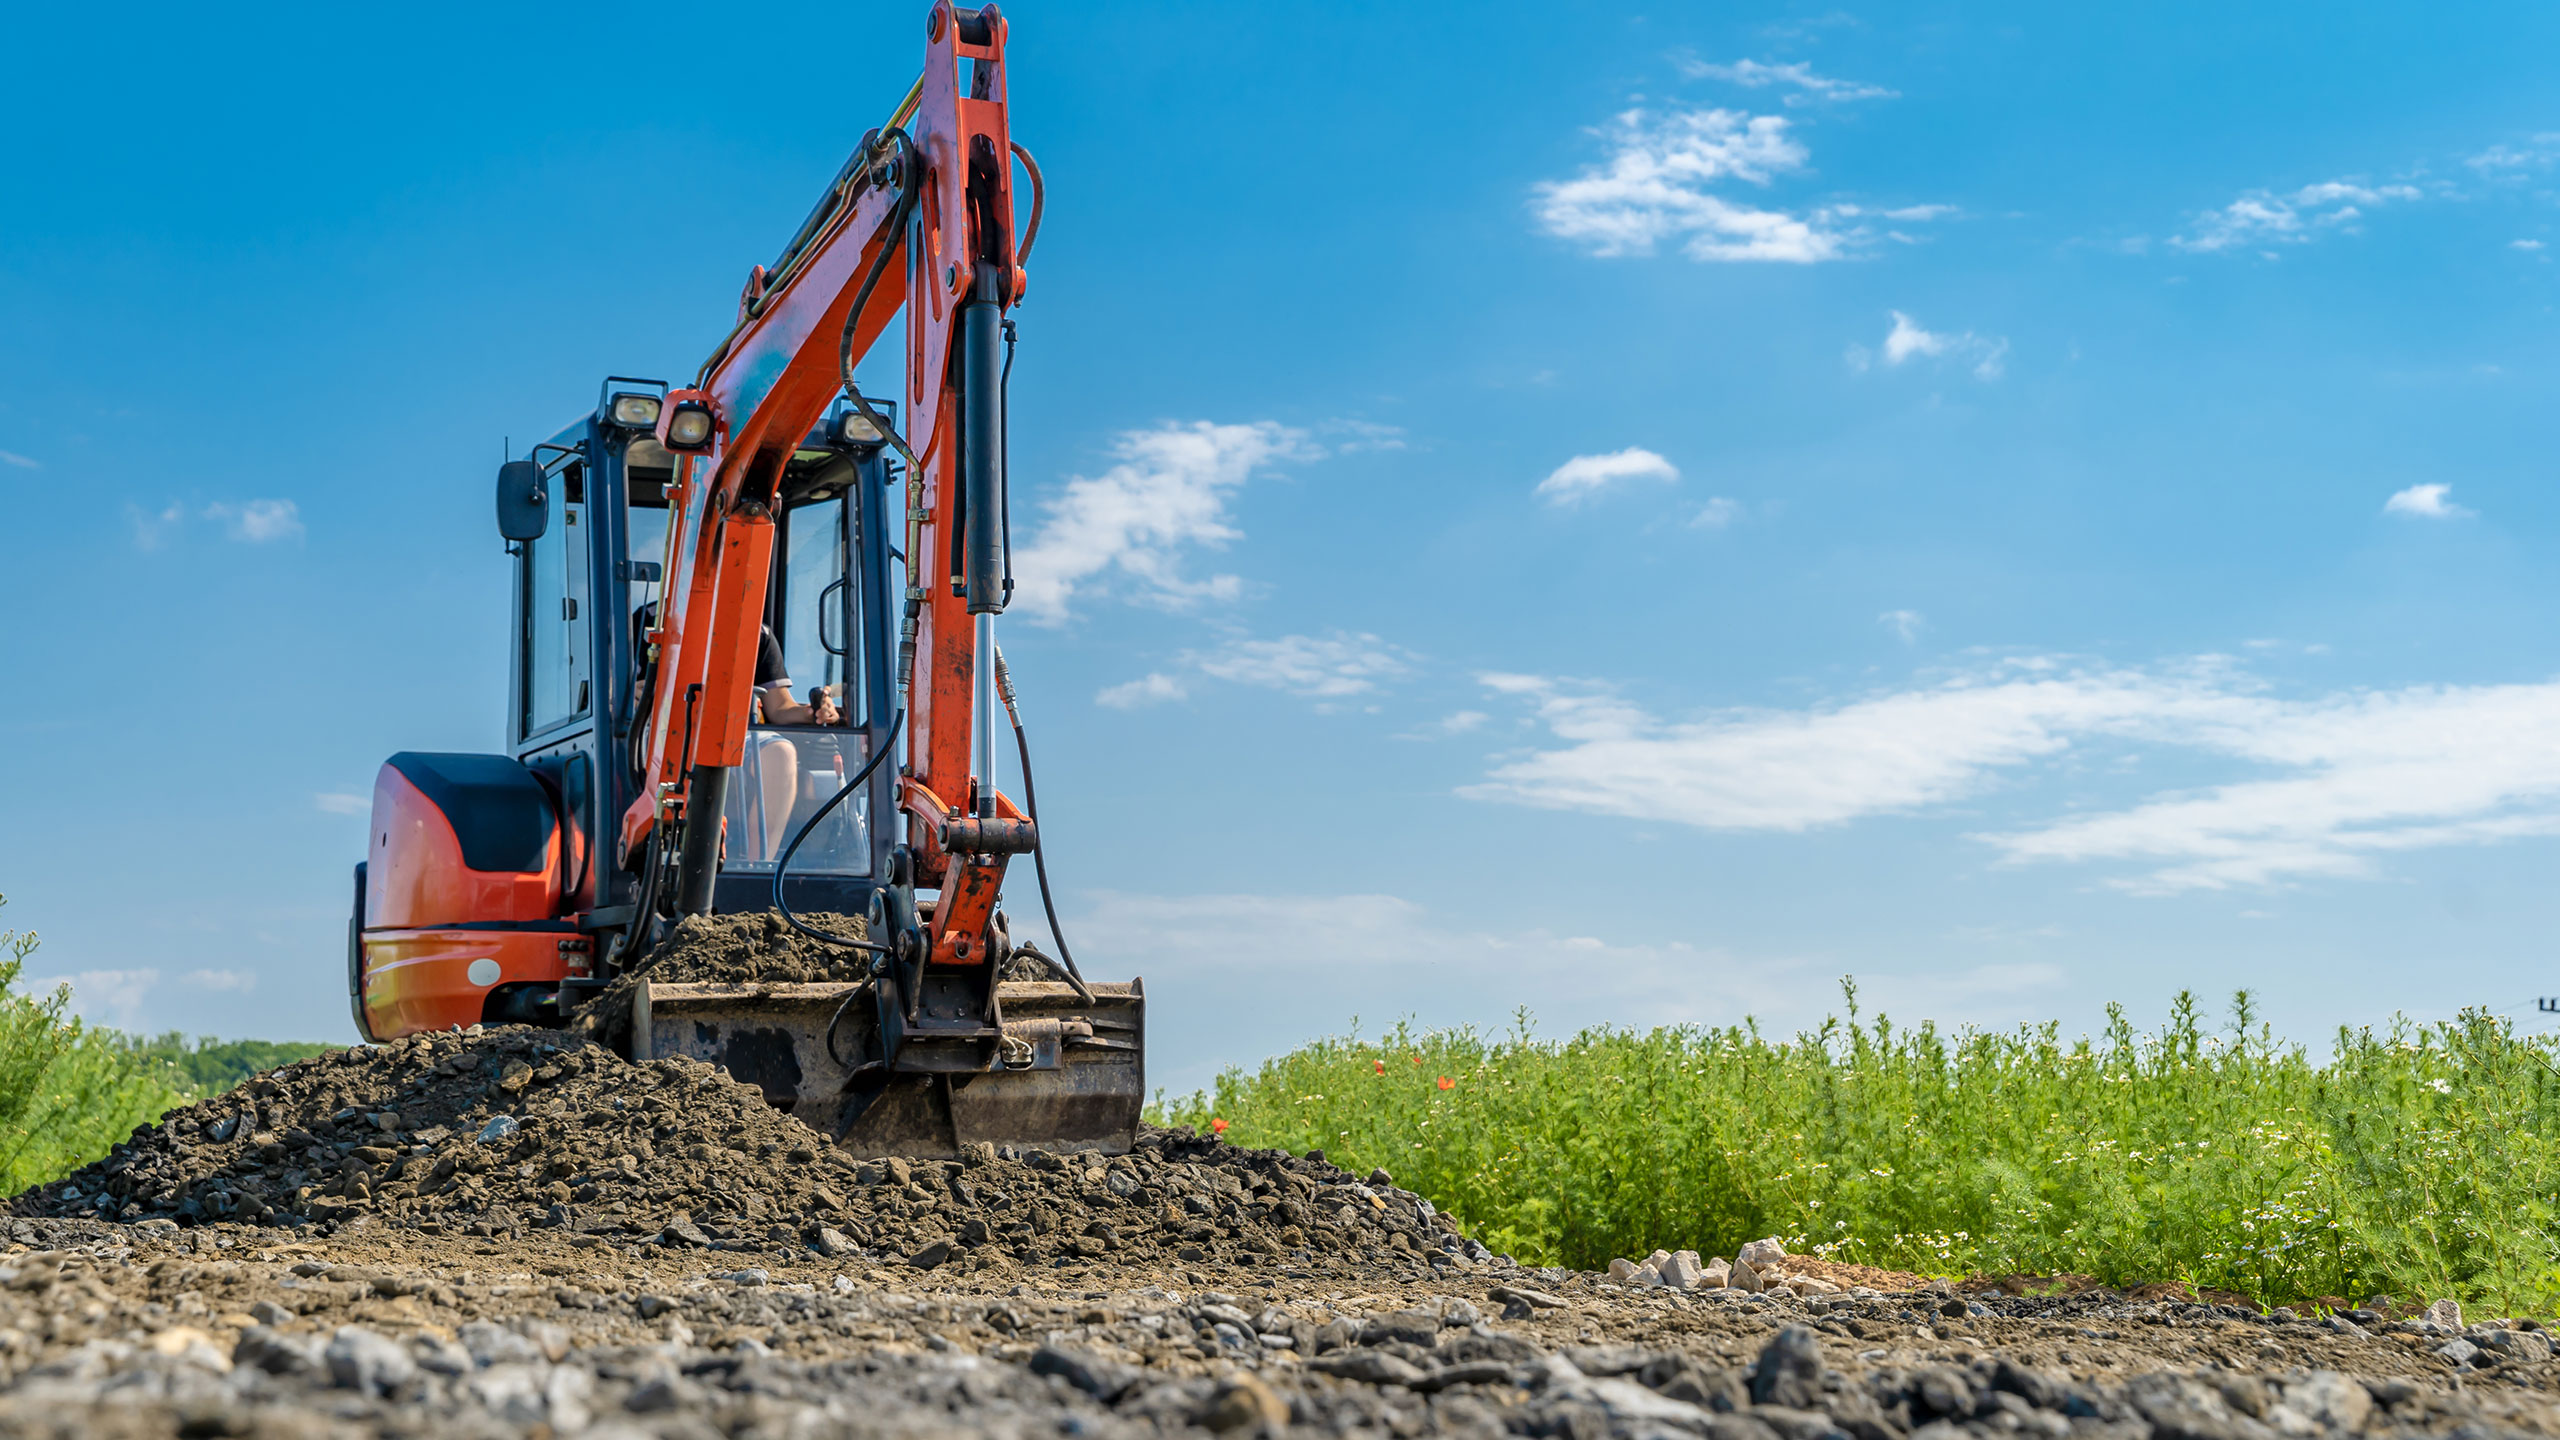 A contractor plant hire machine digging in the soil